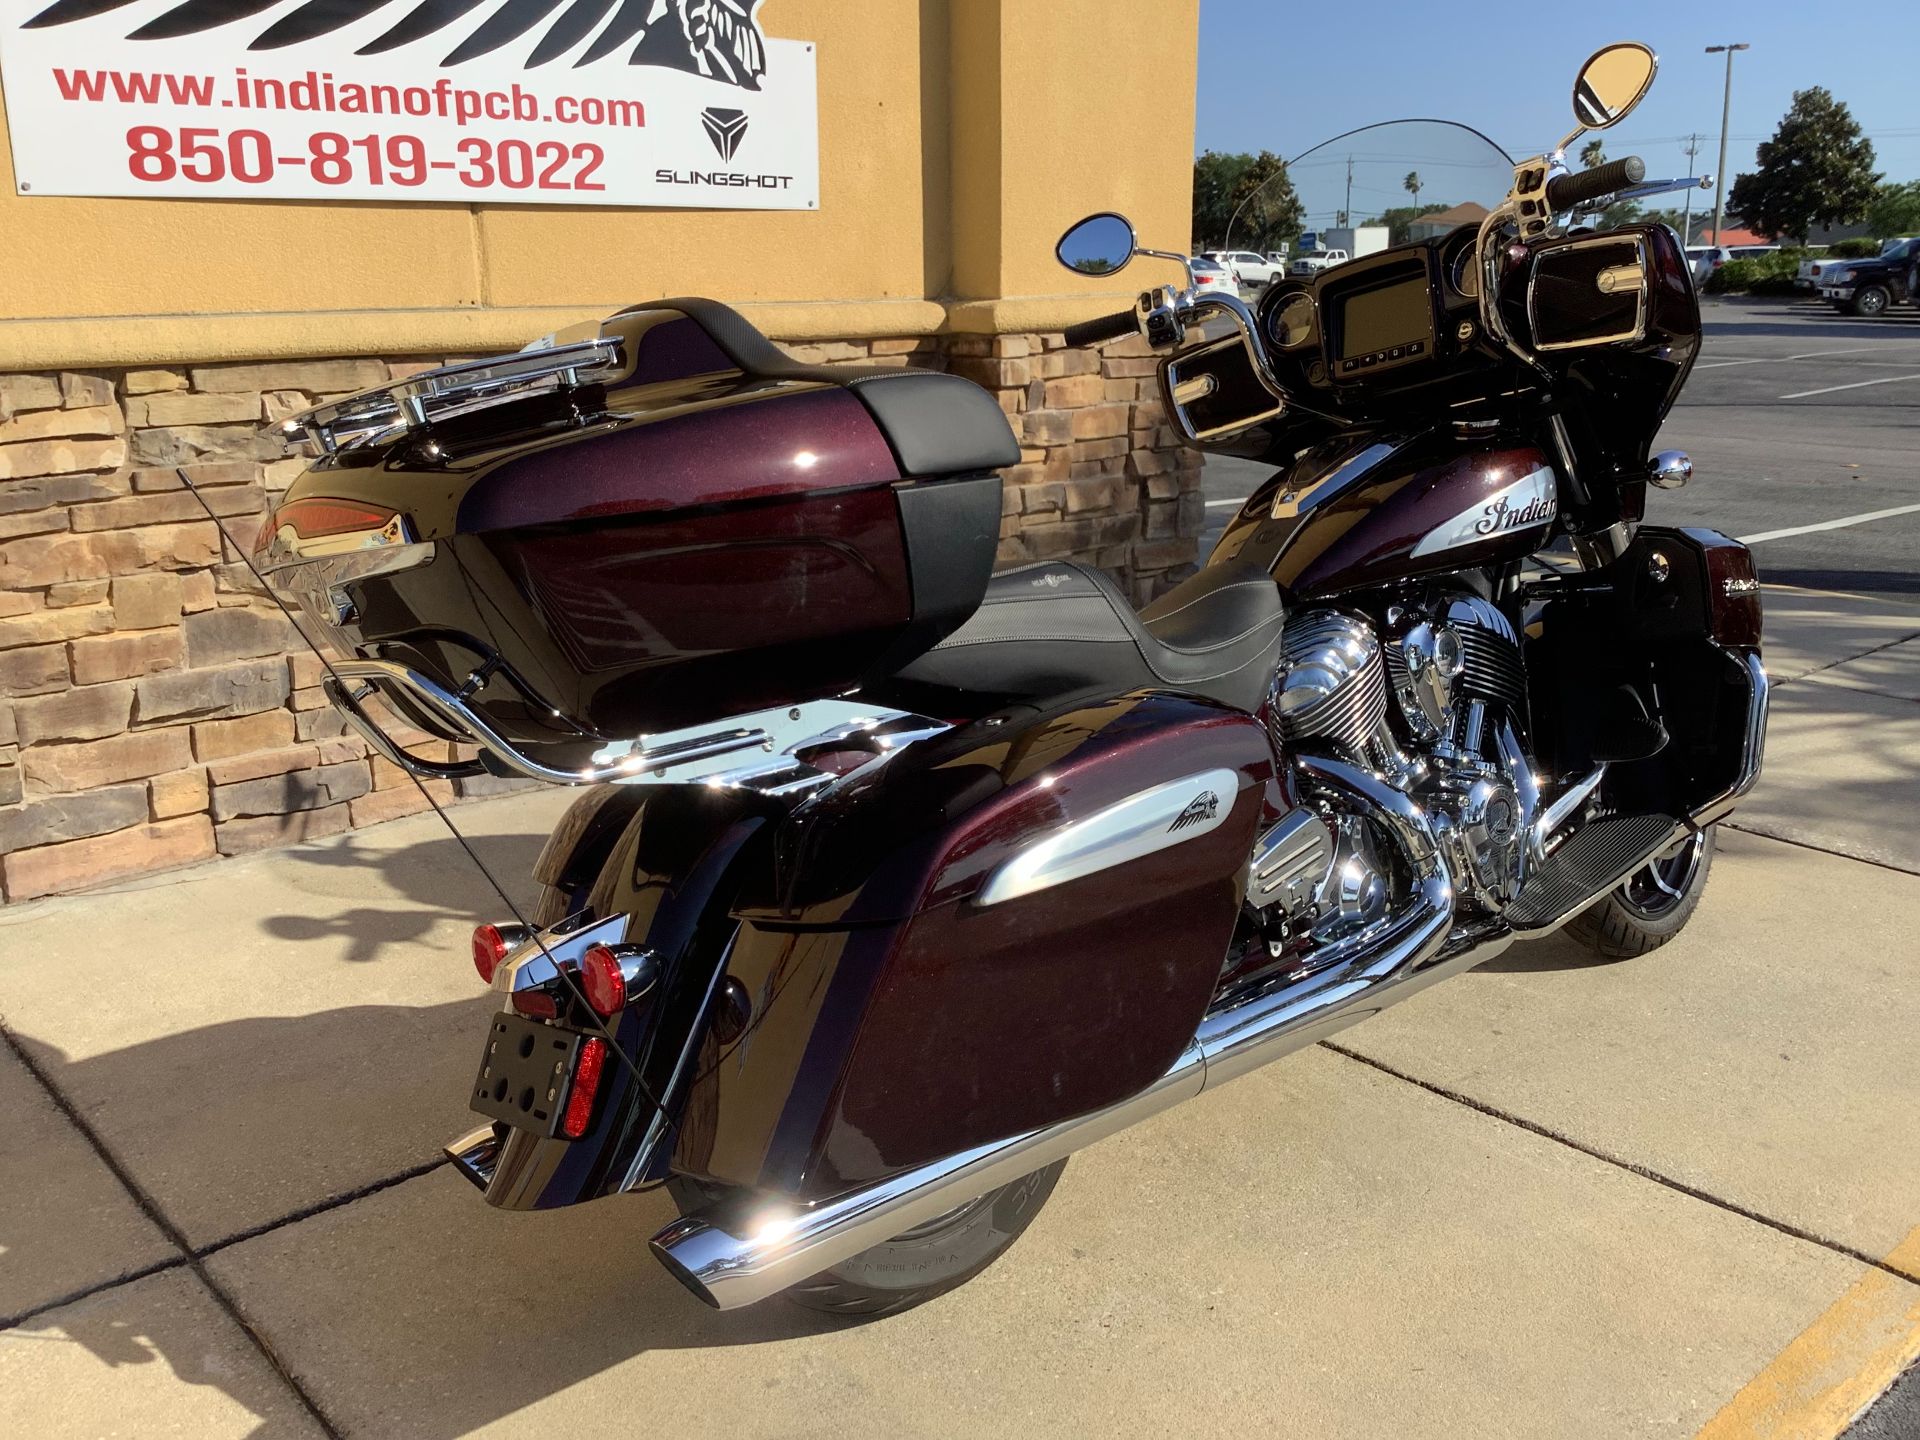 2021 Indian Motorcycle ROADMASTER LIMITED in Panama City Beach, Florida - Photo 3